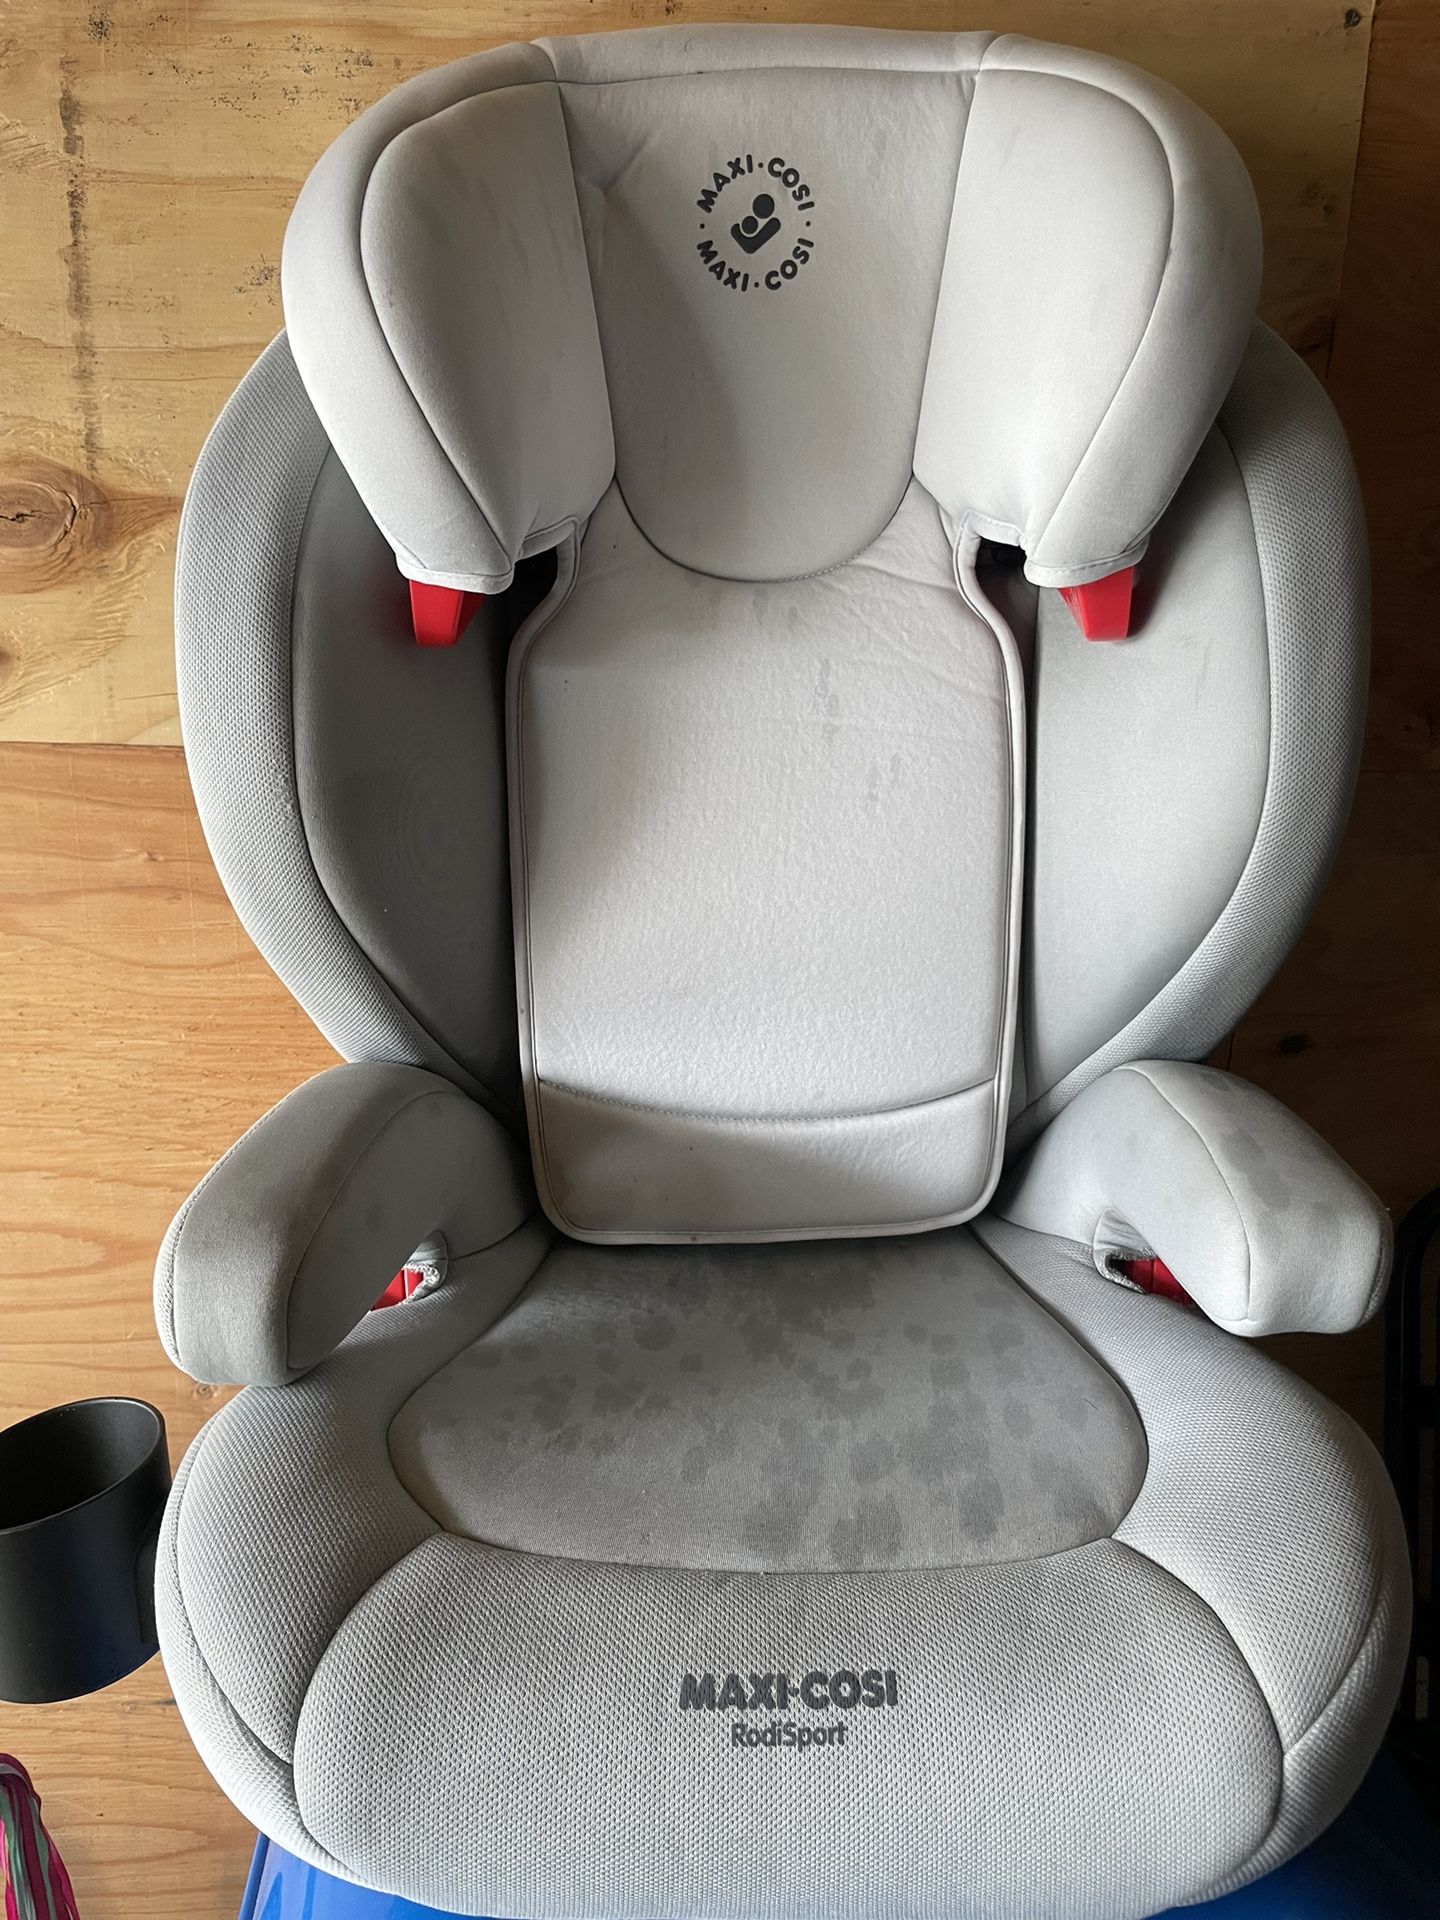 Maxi-Cosí Kids Booster Seat